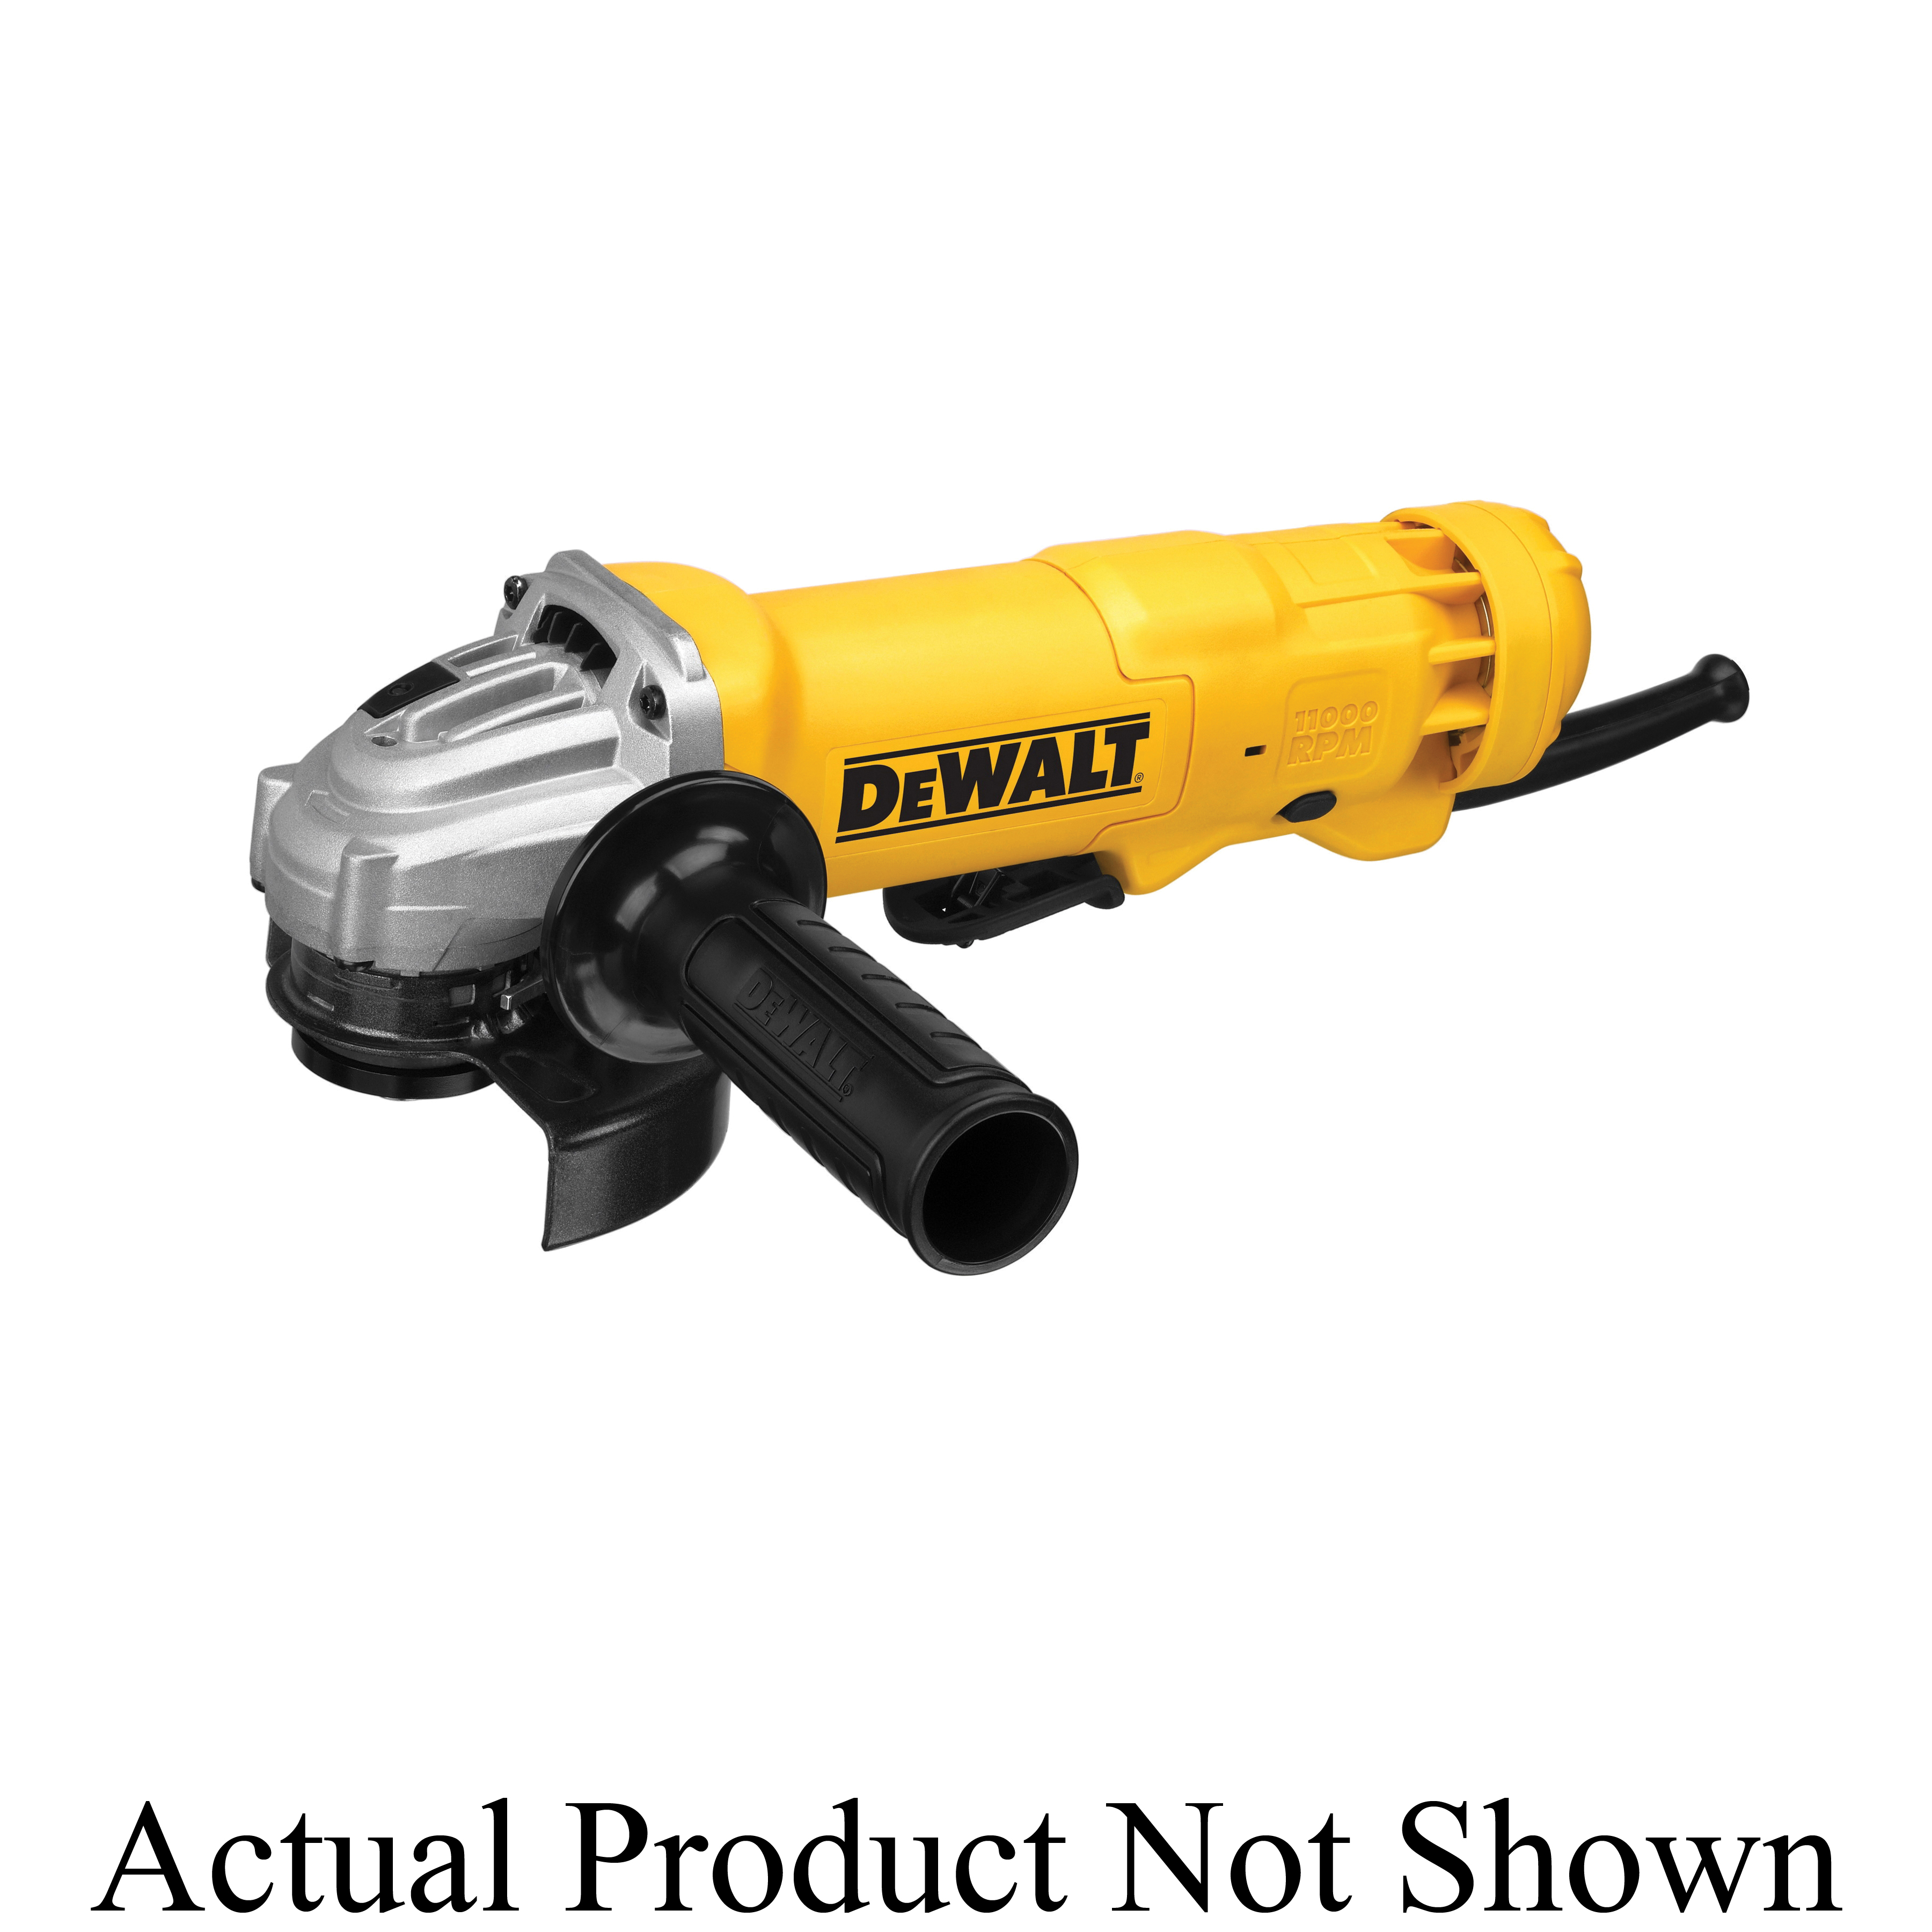 DeWALT® DWE402K Low Profile Small Electric Angle Grinder Kit, 4-1/2 in Dia Wheel, 5/8-11 UNC Arbor/Shank, 120 VAC, For Wheel: Quick-Change™, Black/Yellow, Yes, Paddle Switch Switch